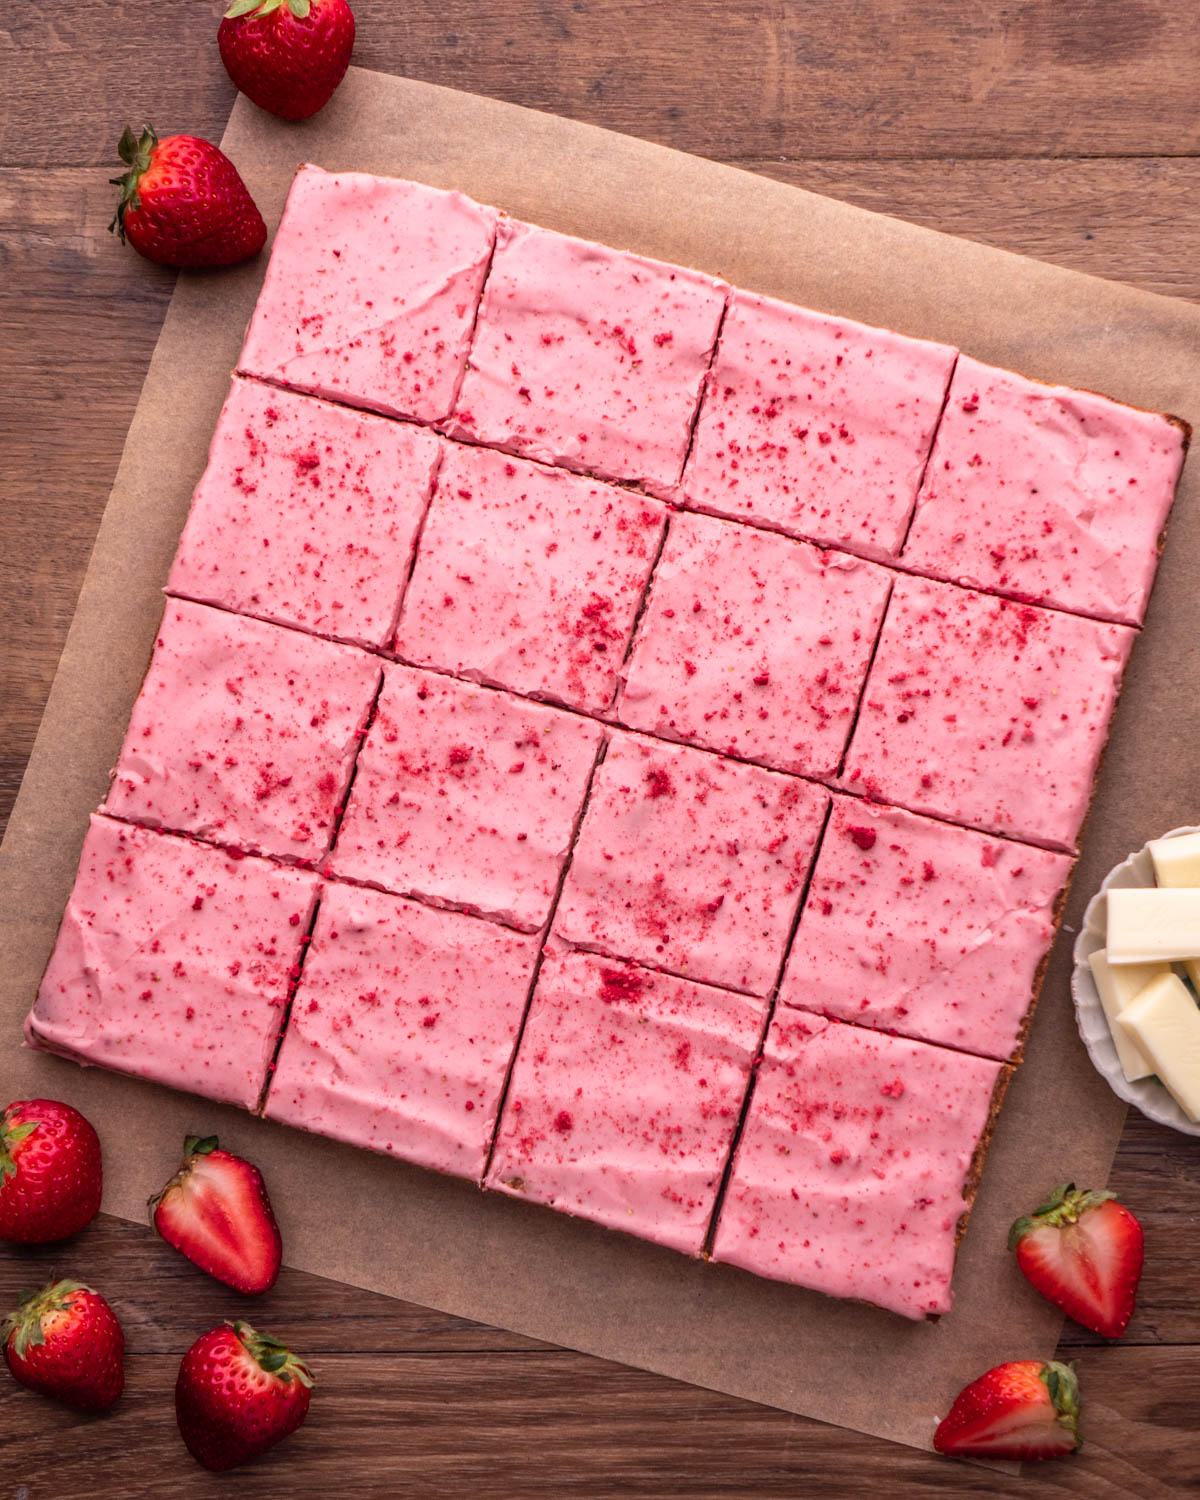 strawberry brownies cut into 16 squares